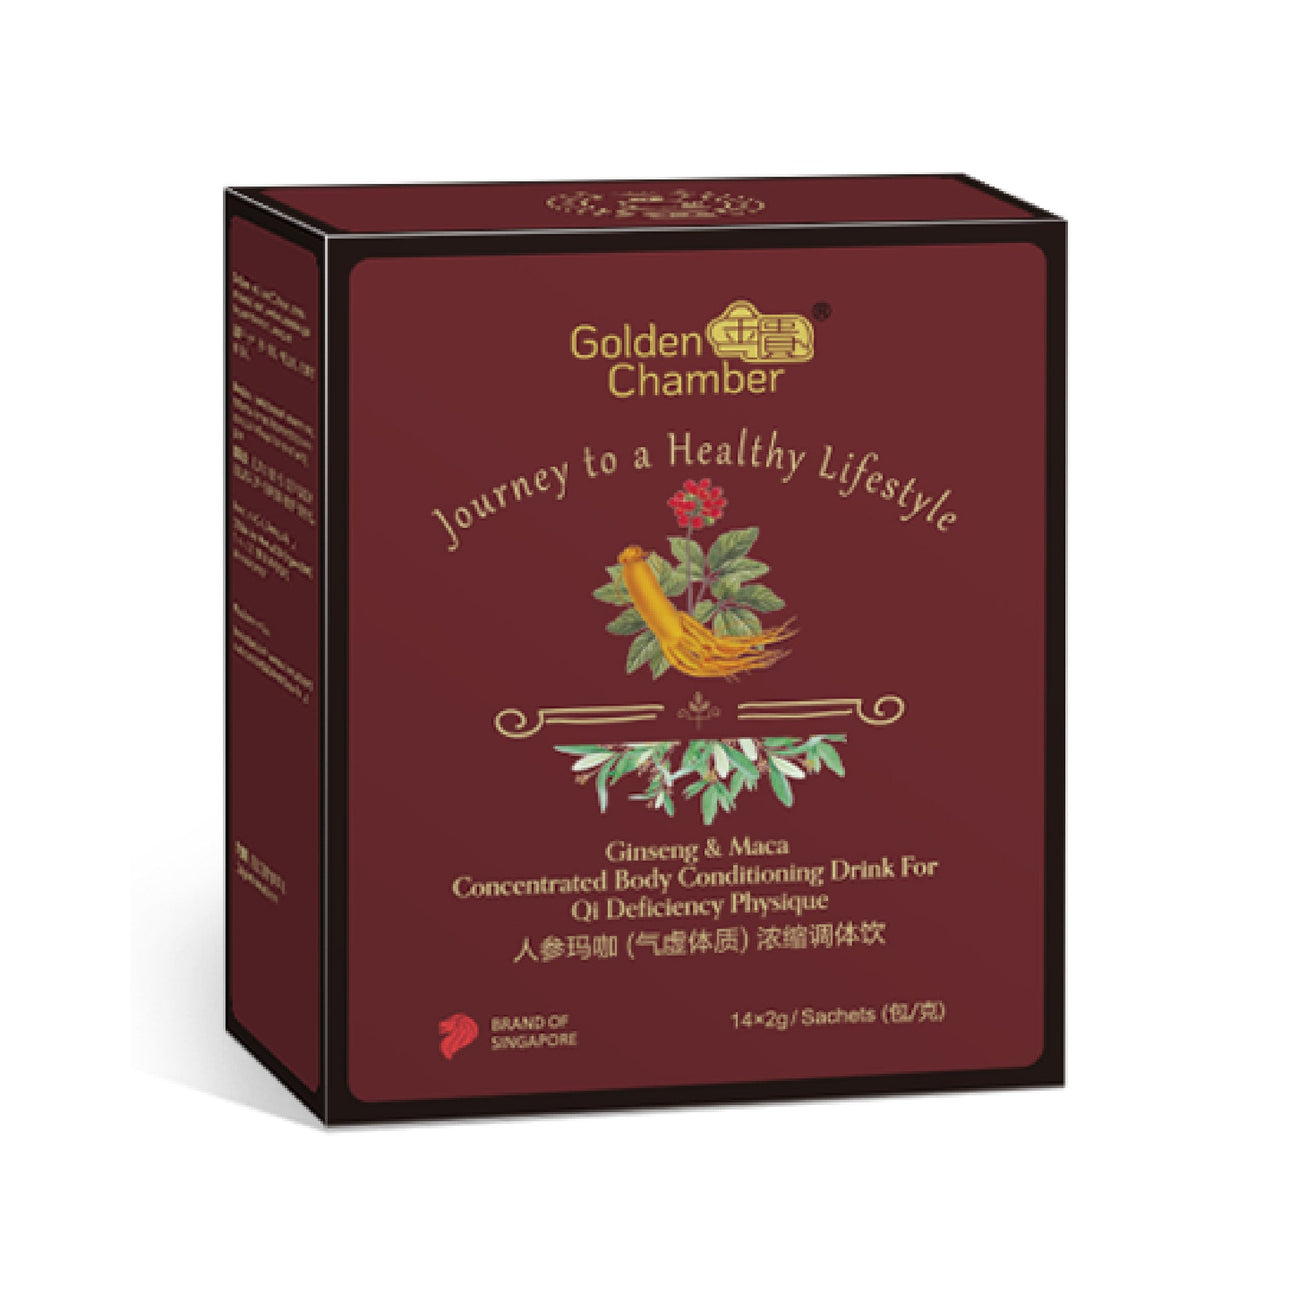 Golden Chamber Ginseng & Maca Concentrated Body Conditioning Drink for Qi Deficiency Physique 人参玛咖气虚体质浓缩调体饮